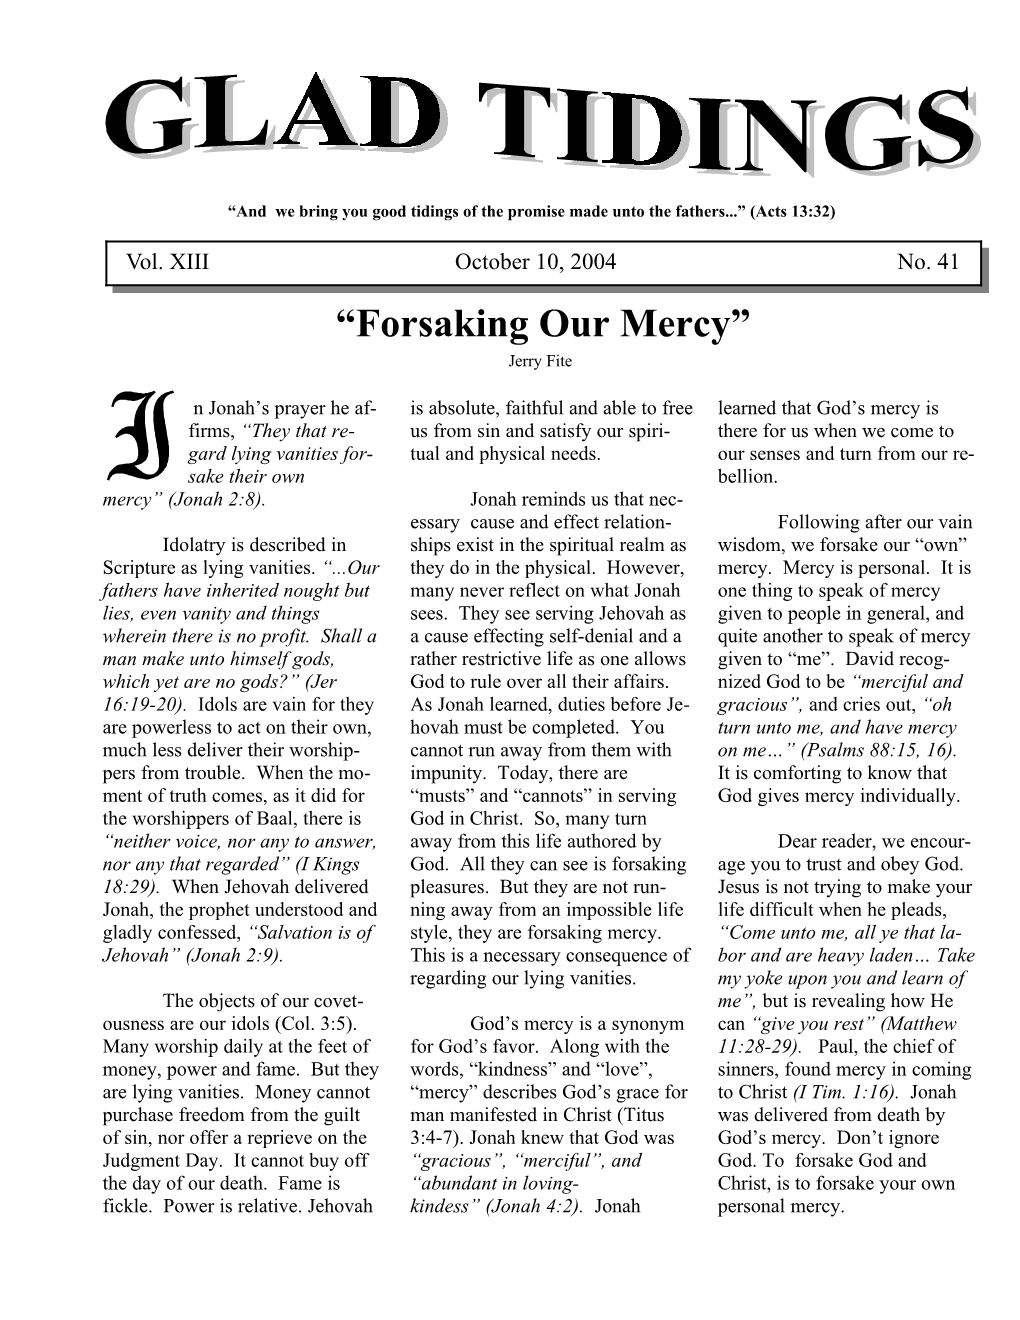 “Forsaking Our Mercy” Jerry Fite